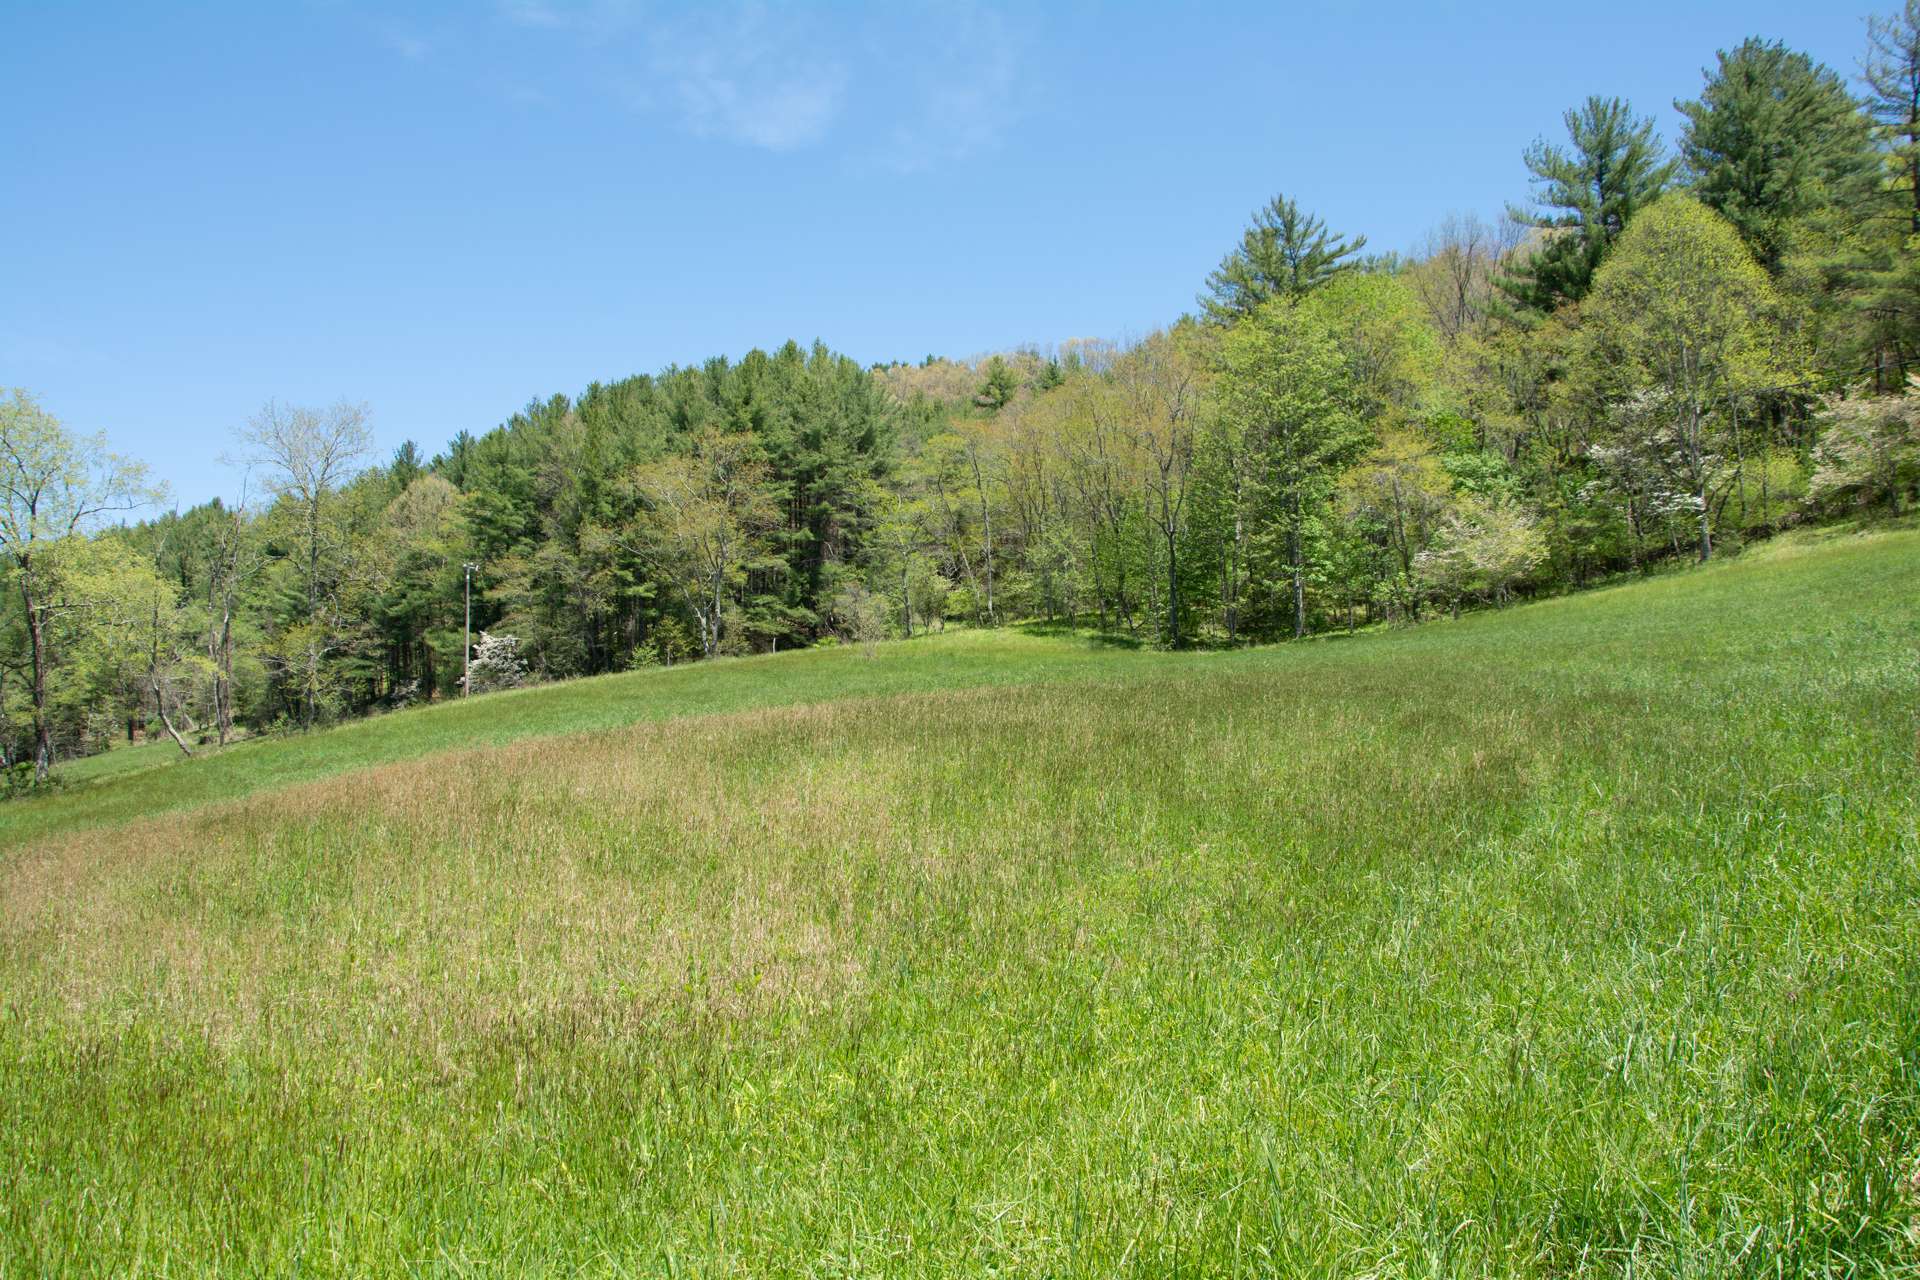 A road has been built to the ridgeline for easy access.  This property has been divided into